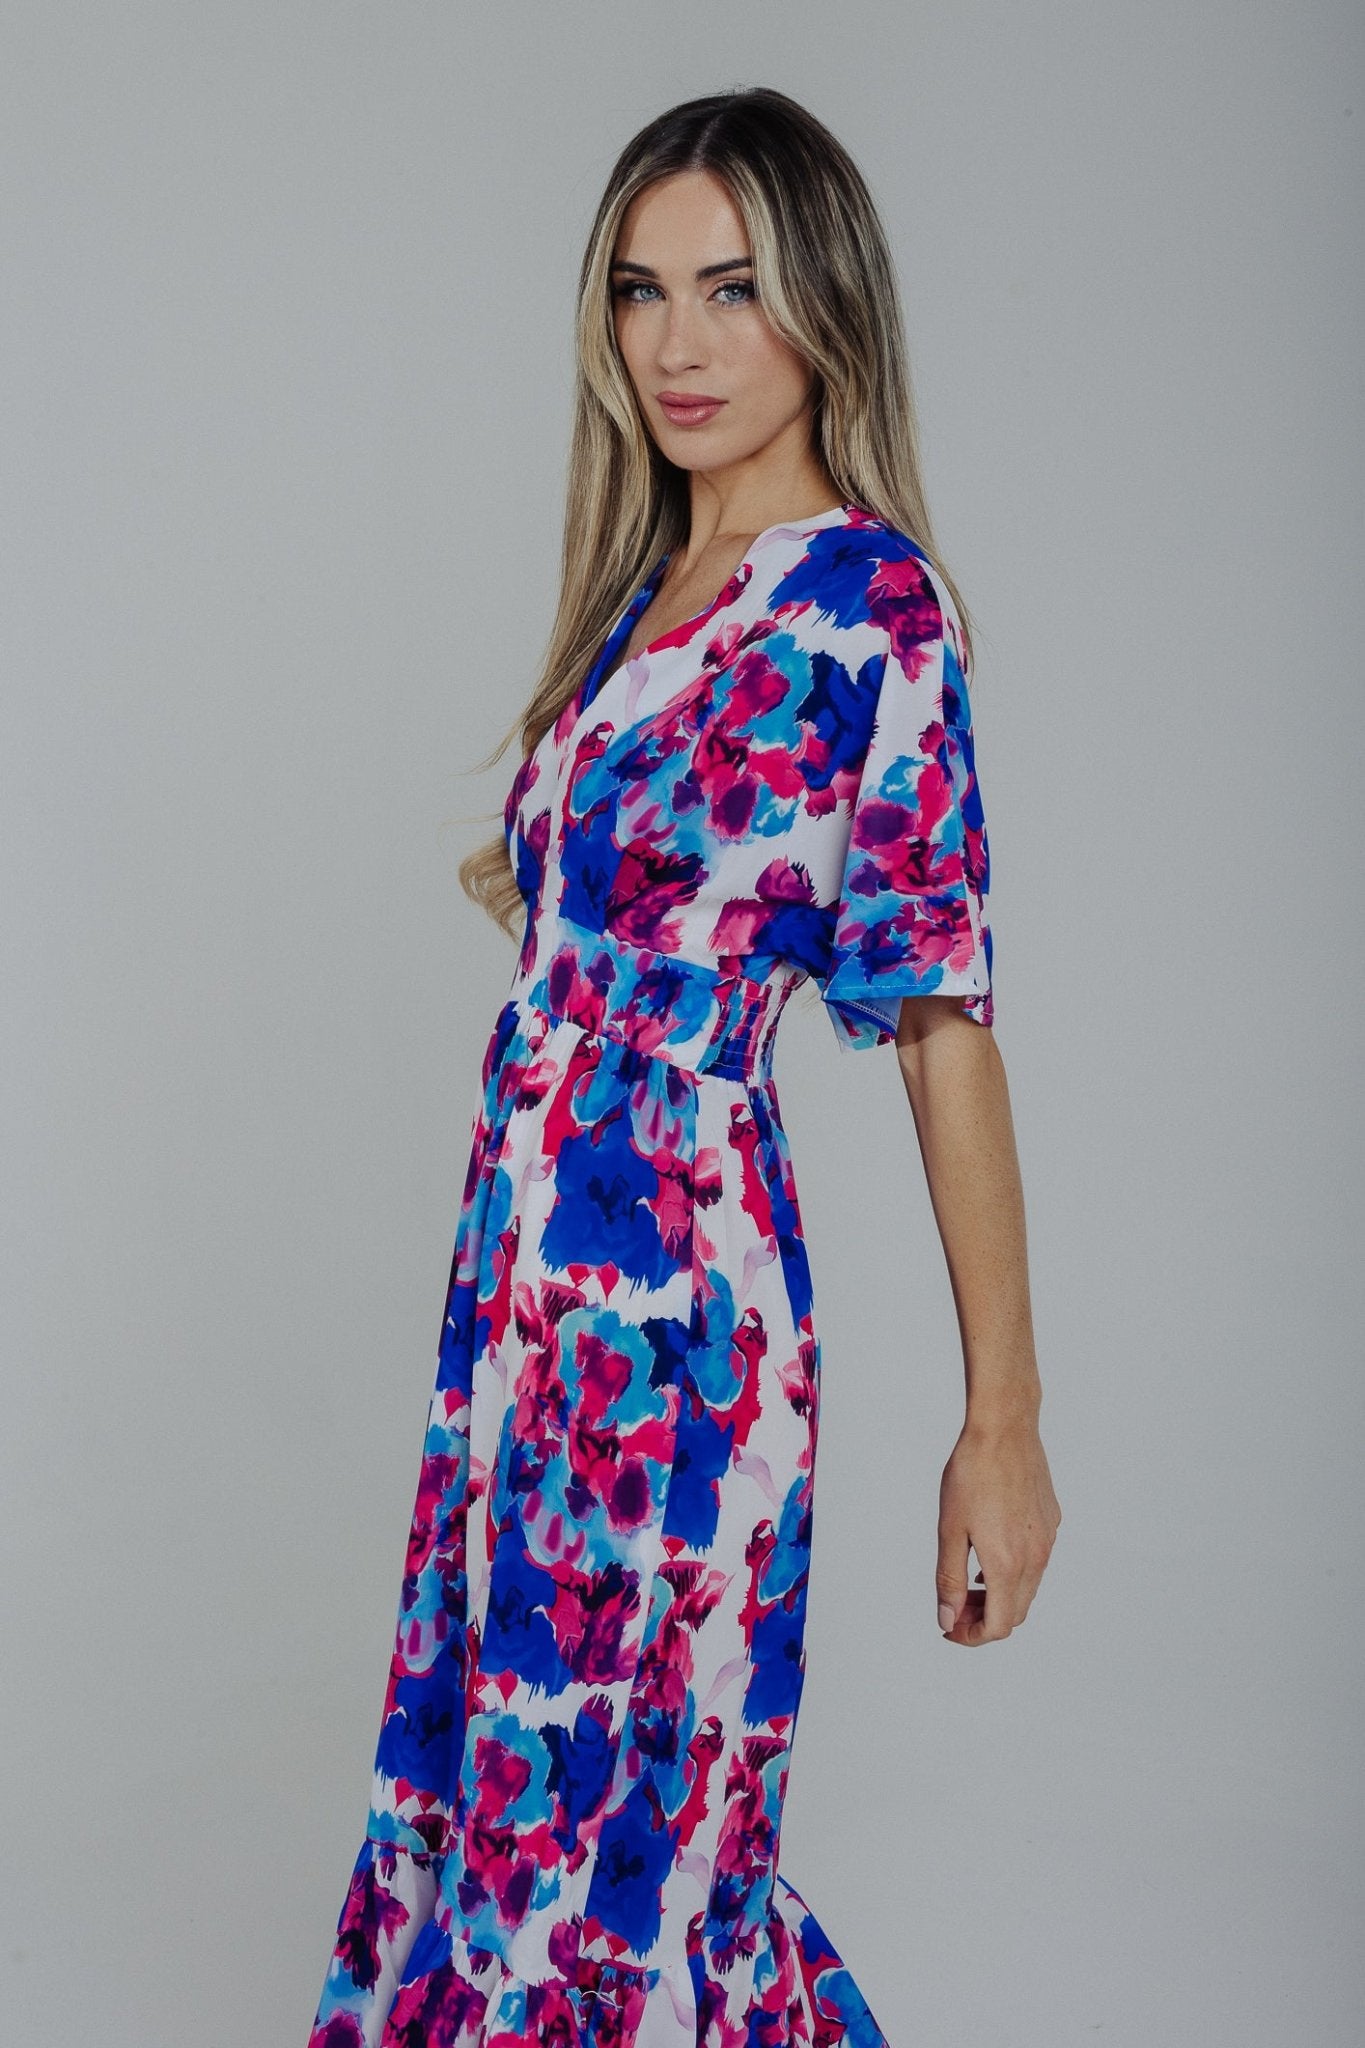 Polly Floral Midi Dress In Blue Mix - The Walk in Wardrobe